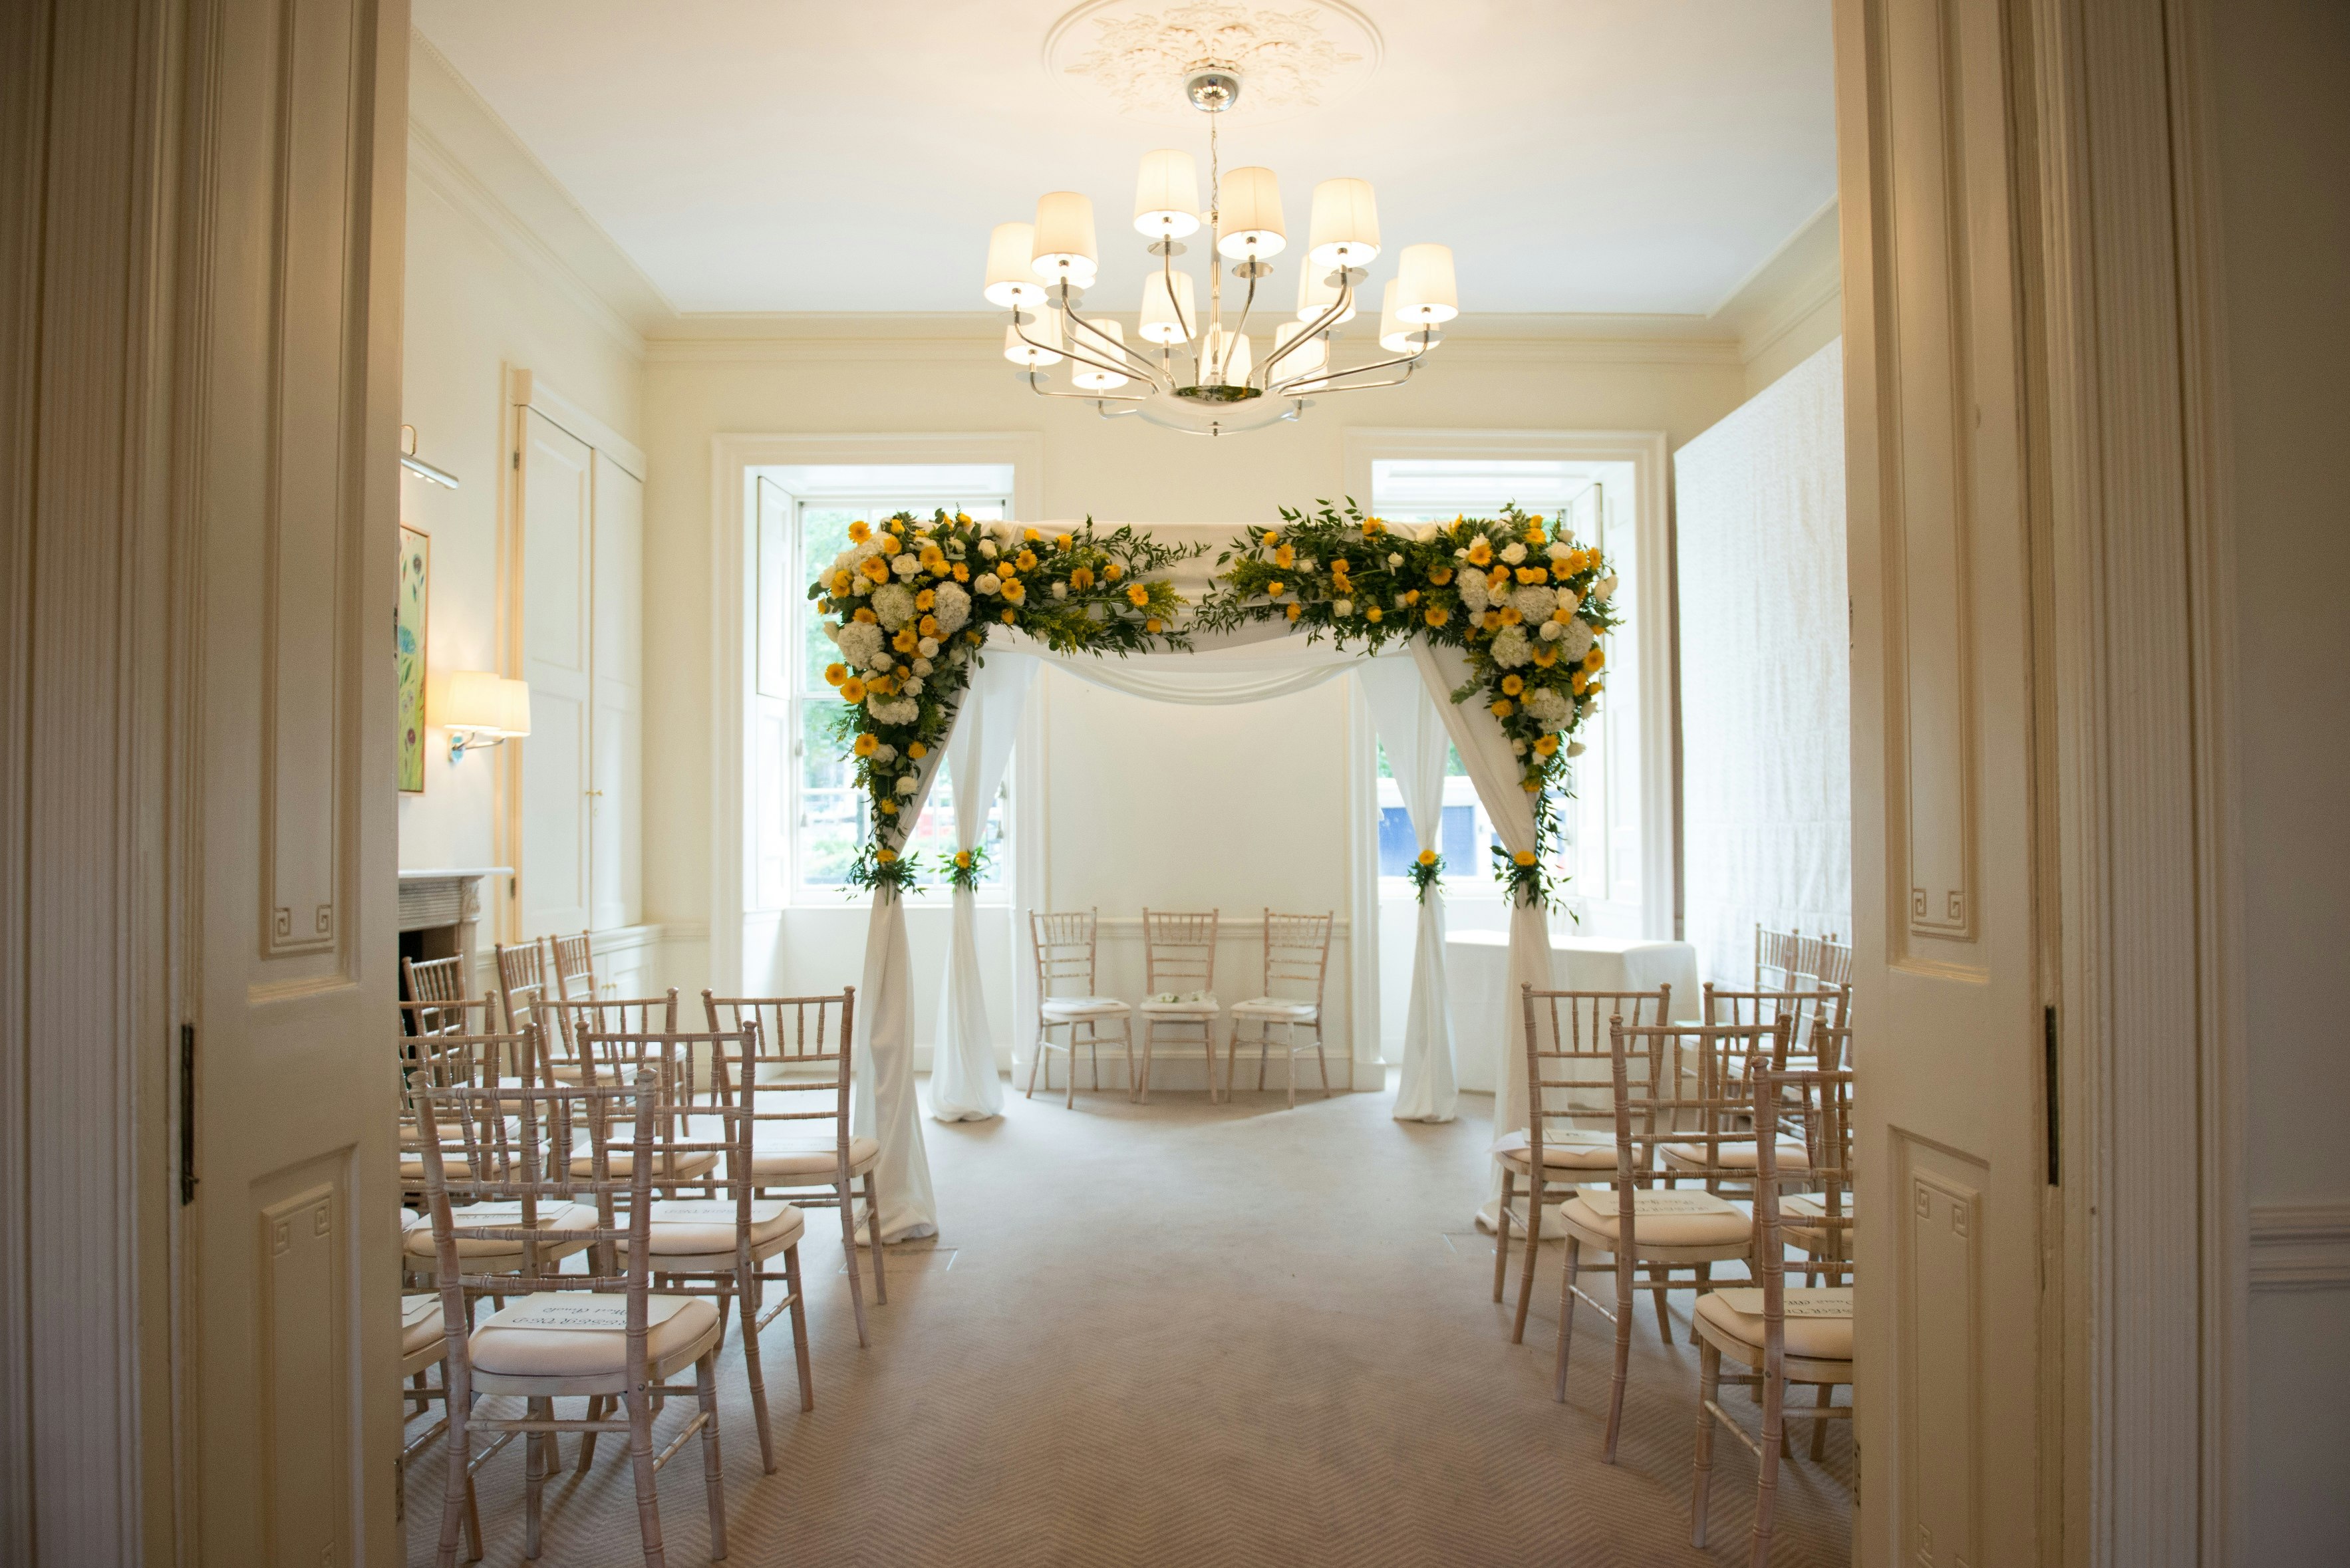 Wedding Venues in Mayfair - No.11 Cavendish Square